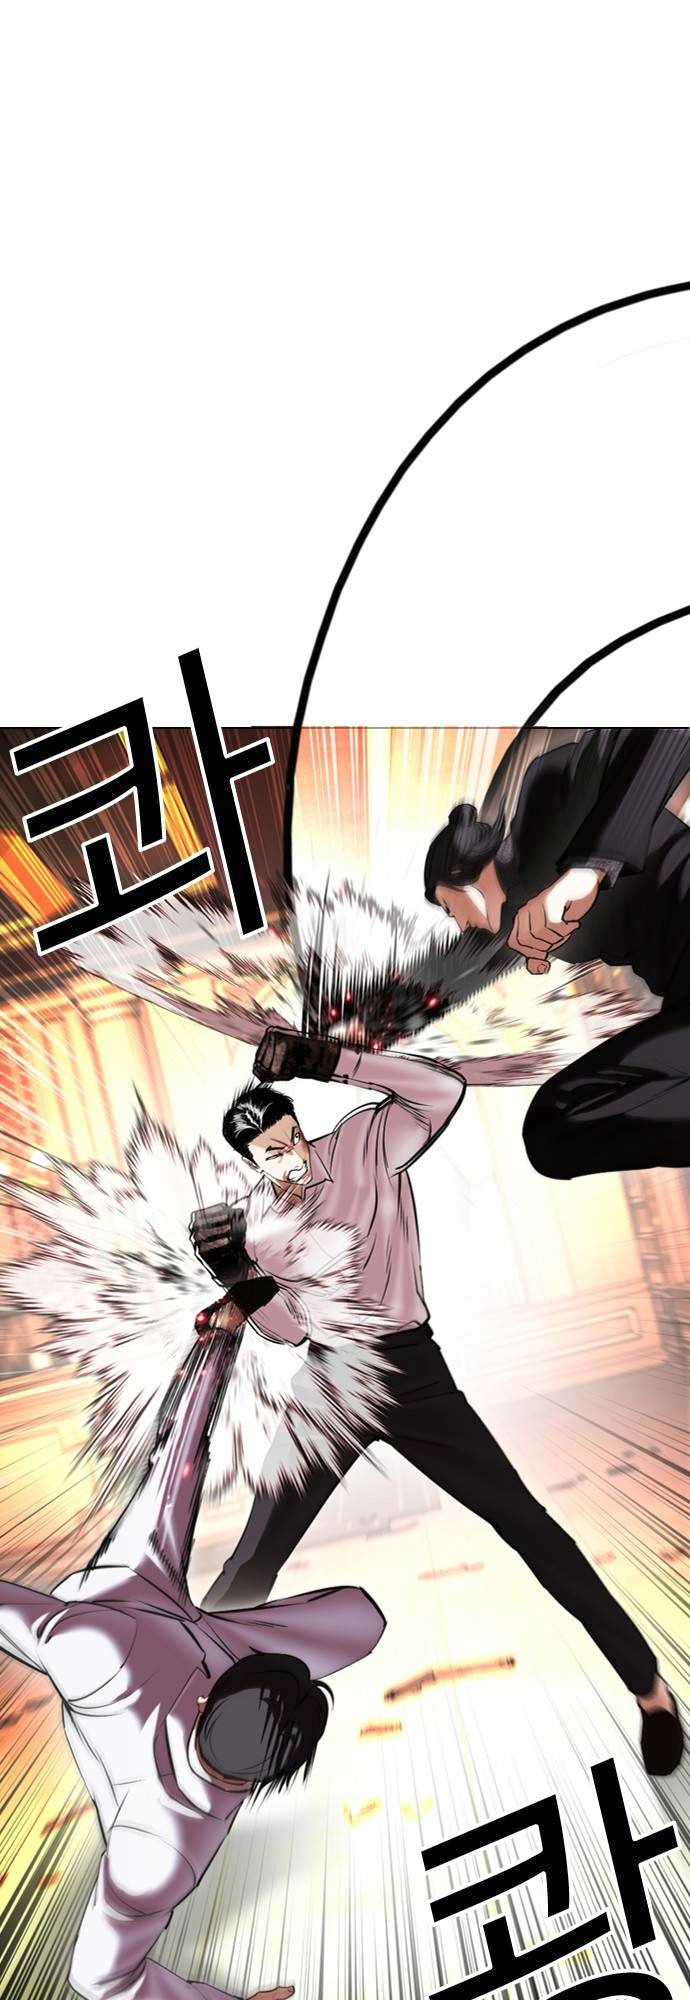 Lookism Chapter 415 image 007